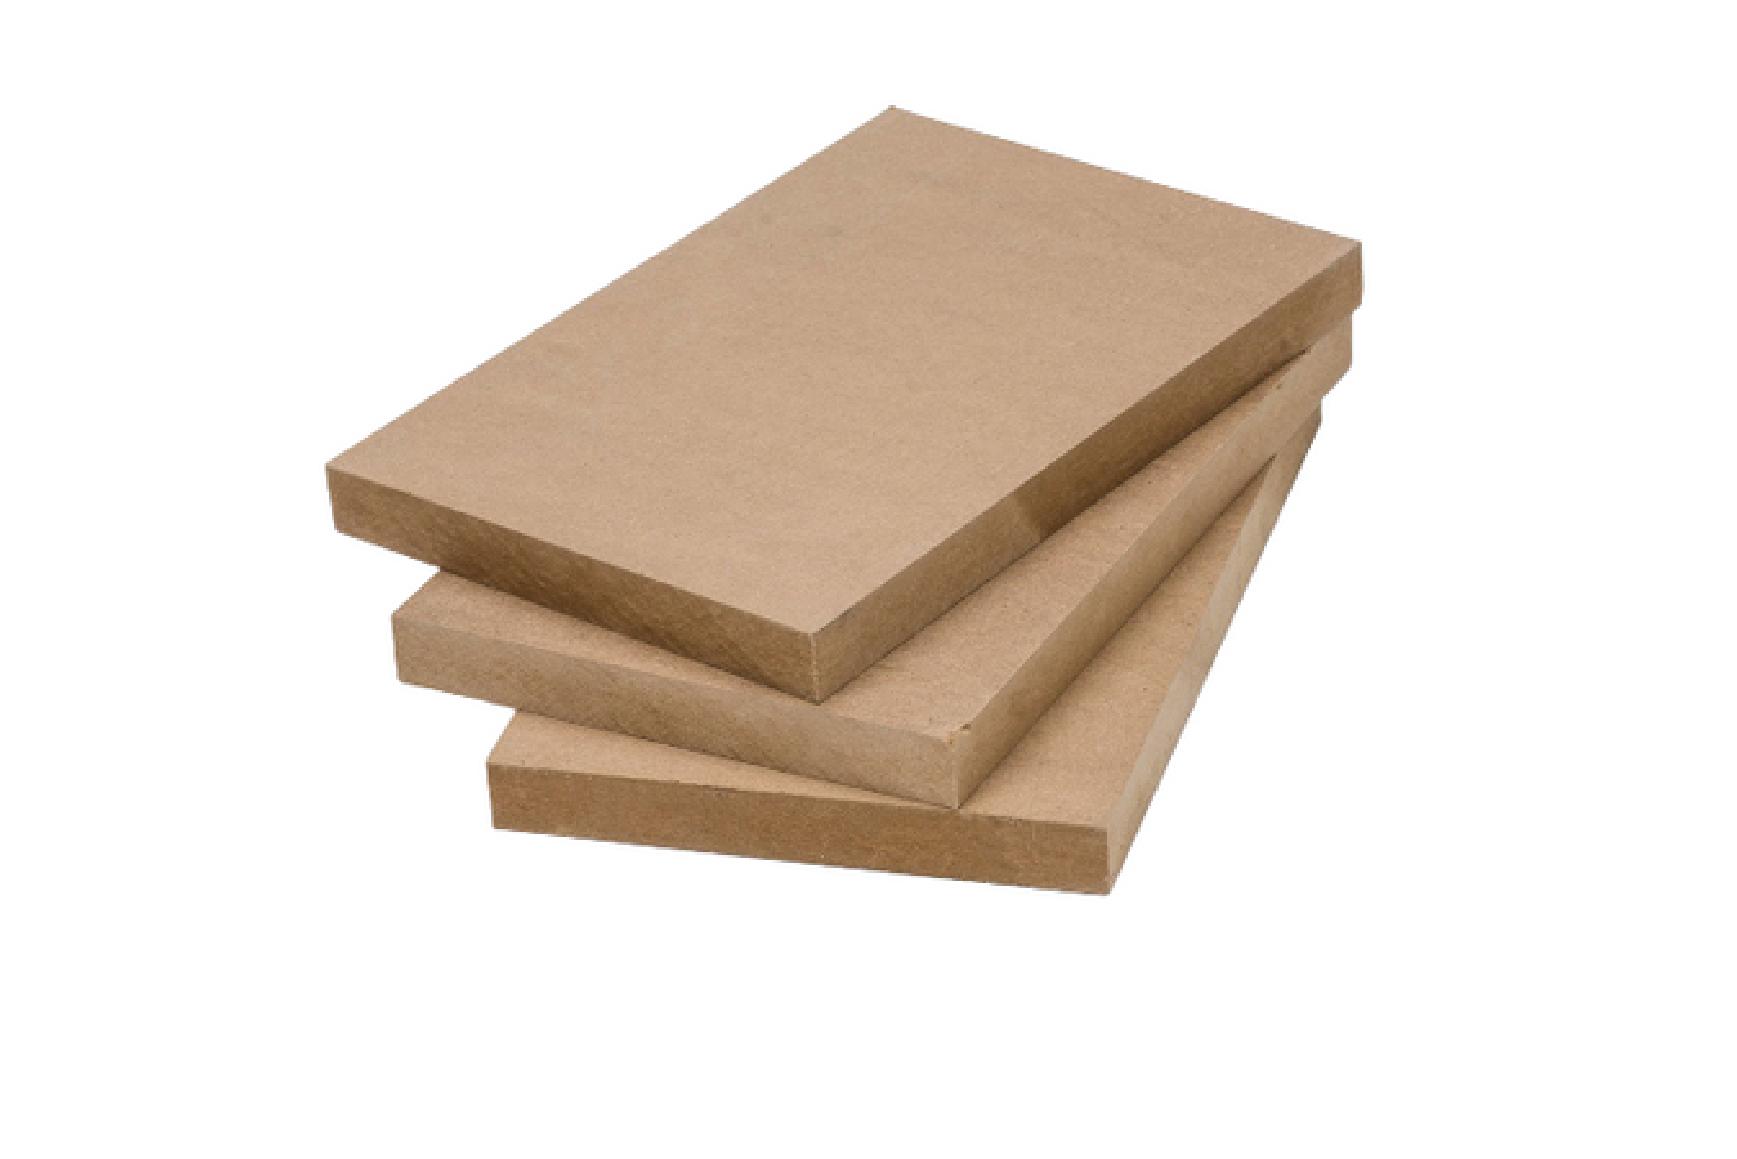 Hj traders plywood products